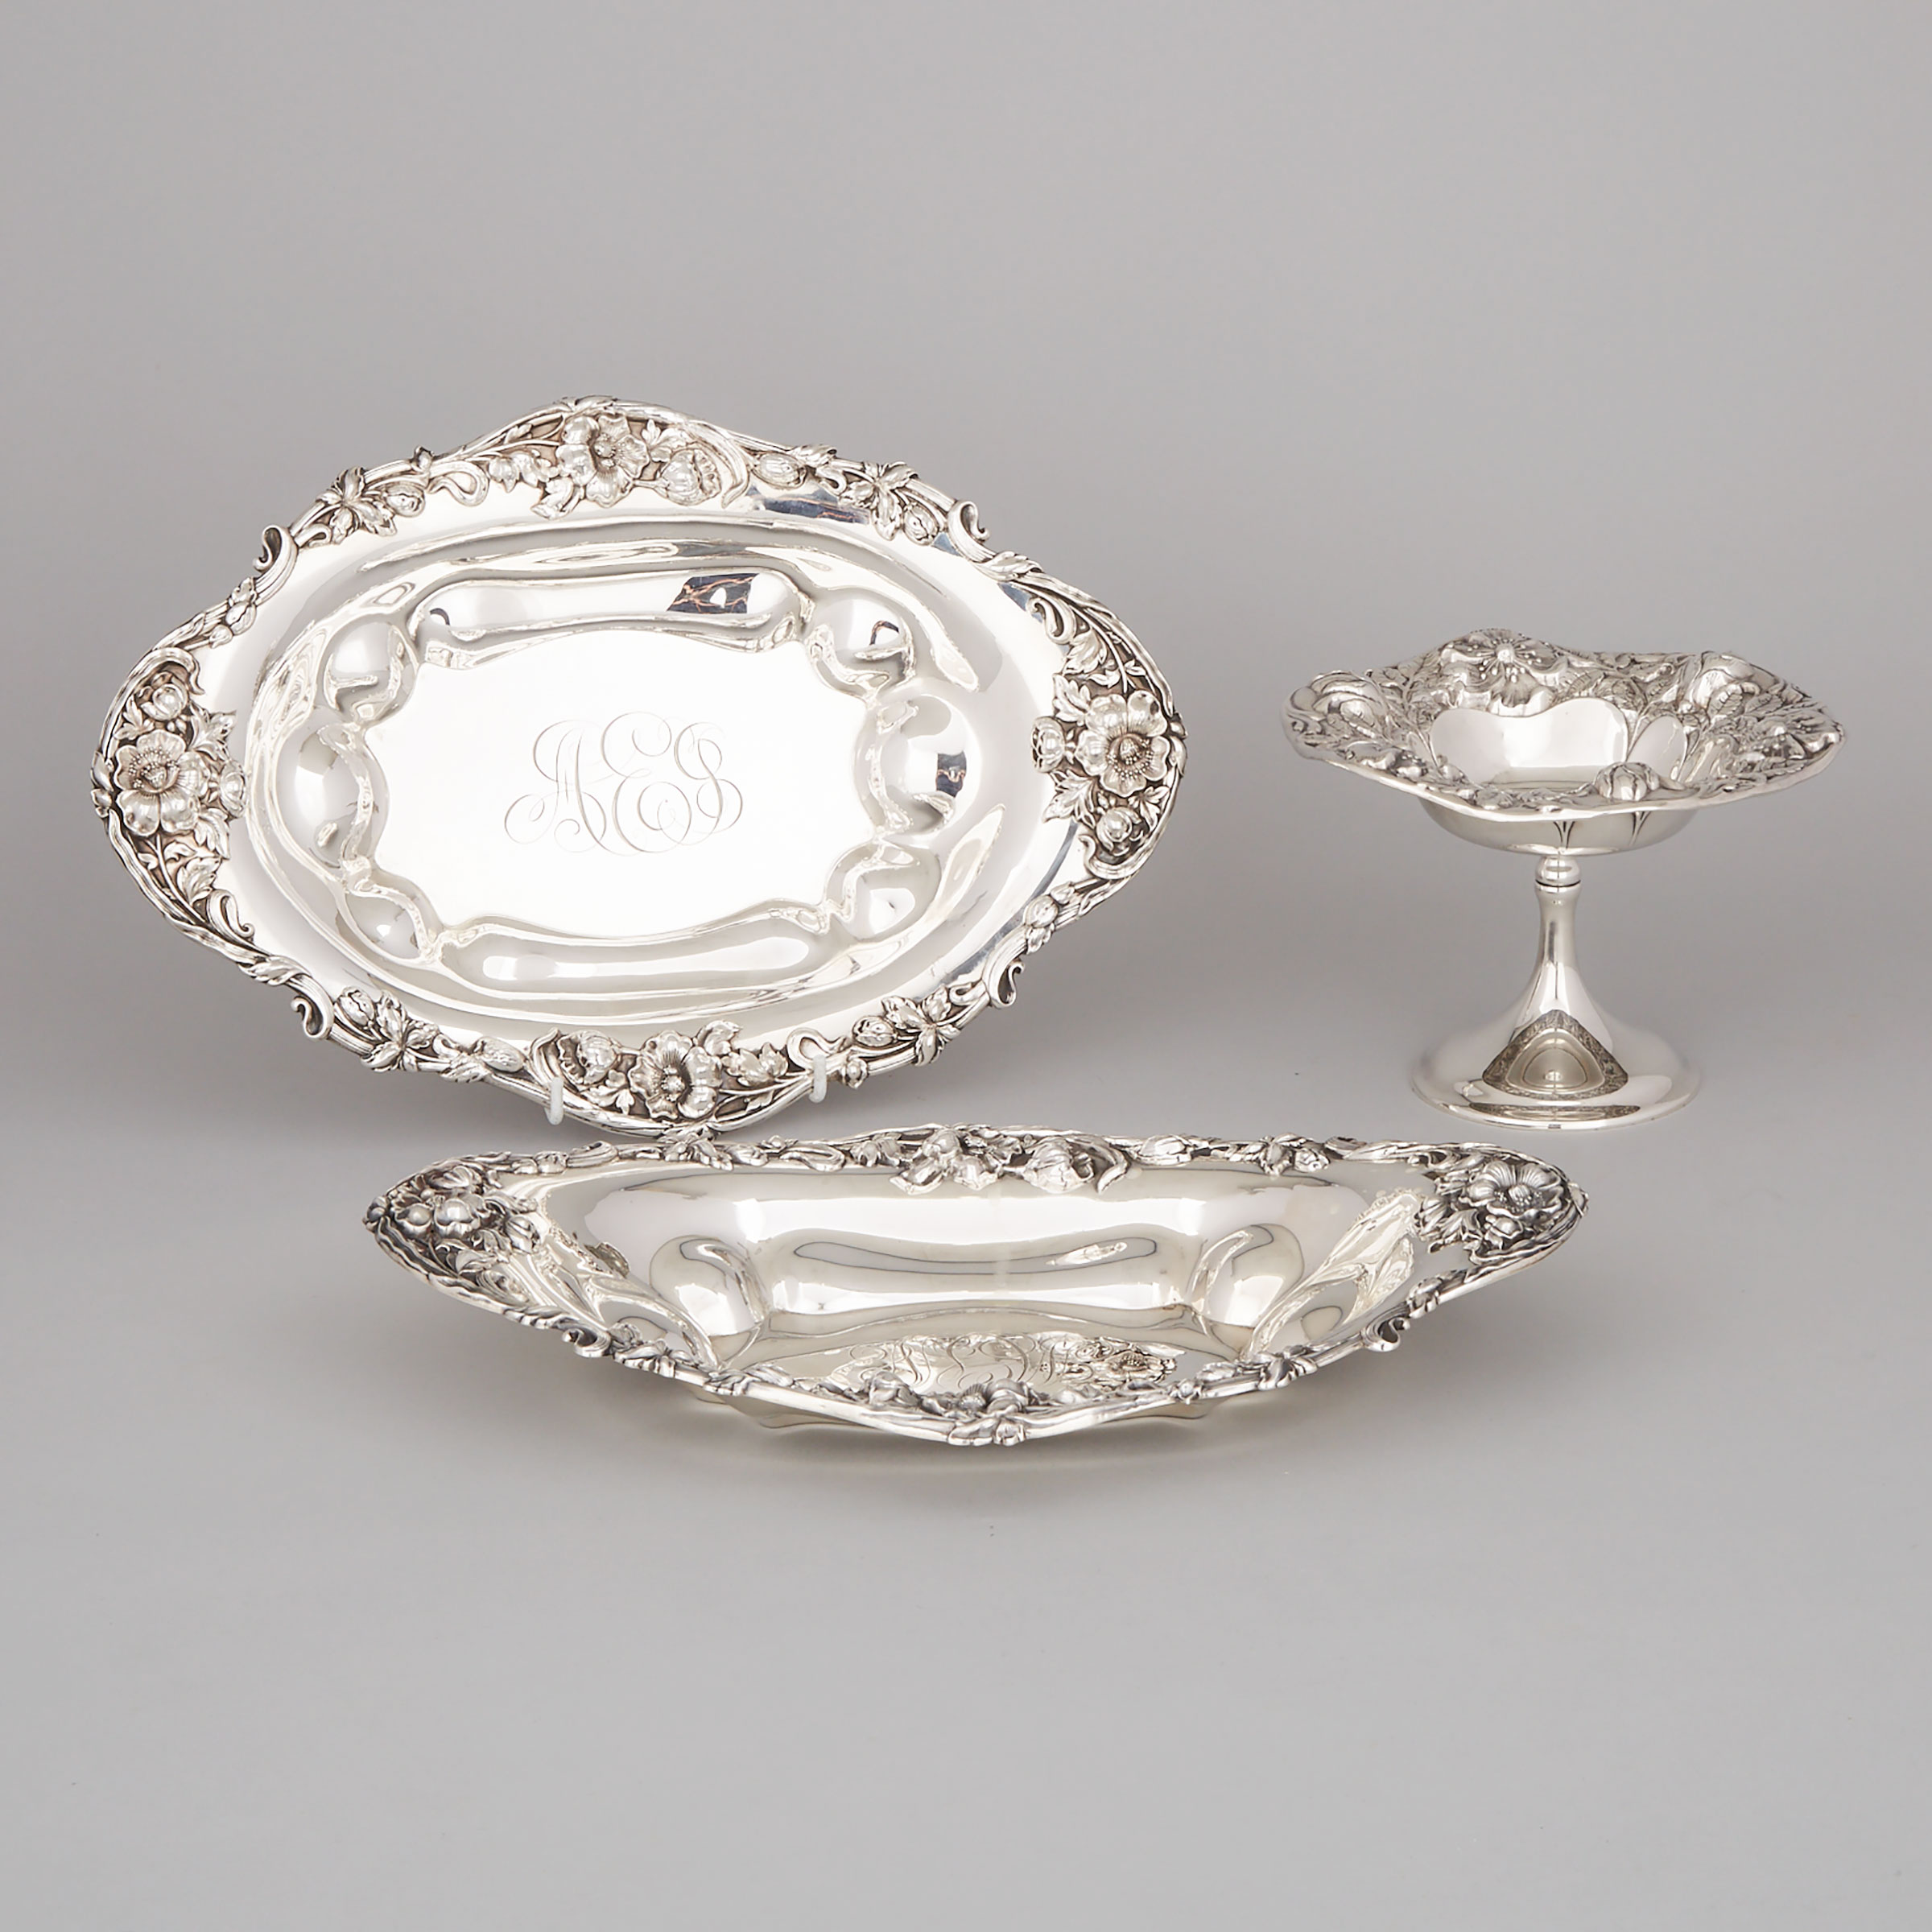 American Silver Comport and Two Oval Dishes, Gorham Mfg. Co., Providence, R.I., and J.E. Caldwell & Co., Philadelphia, Pa., early 20th century